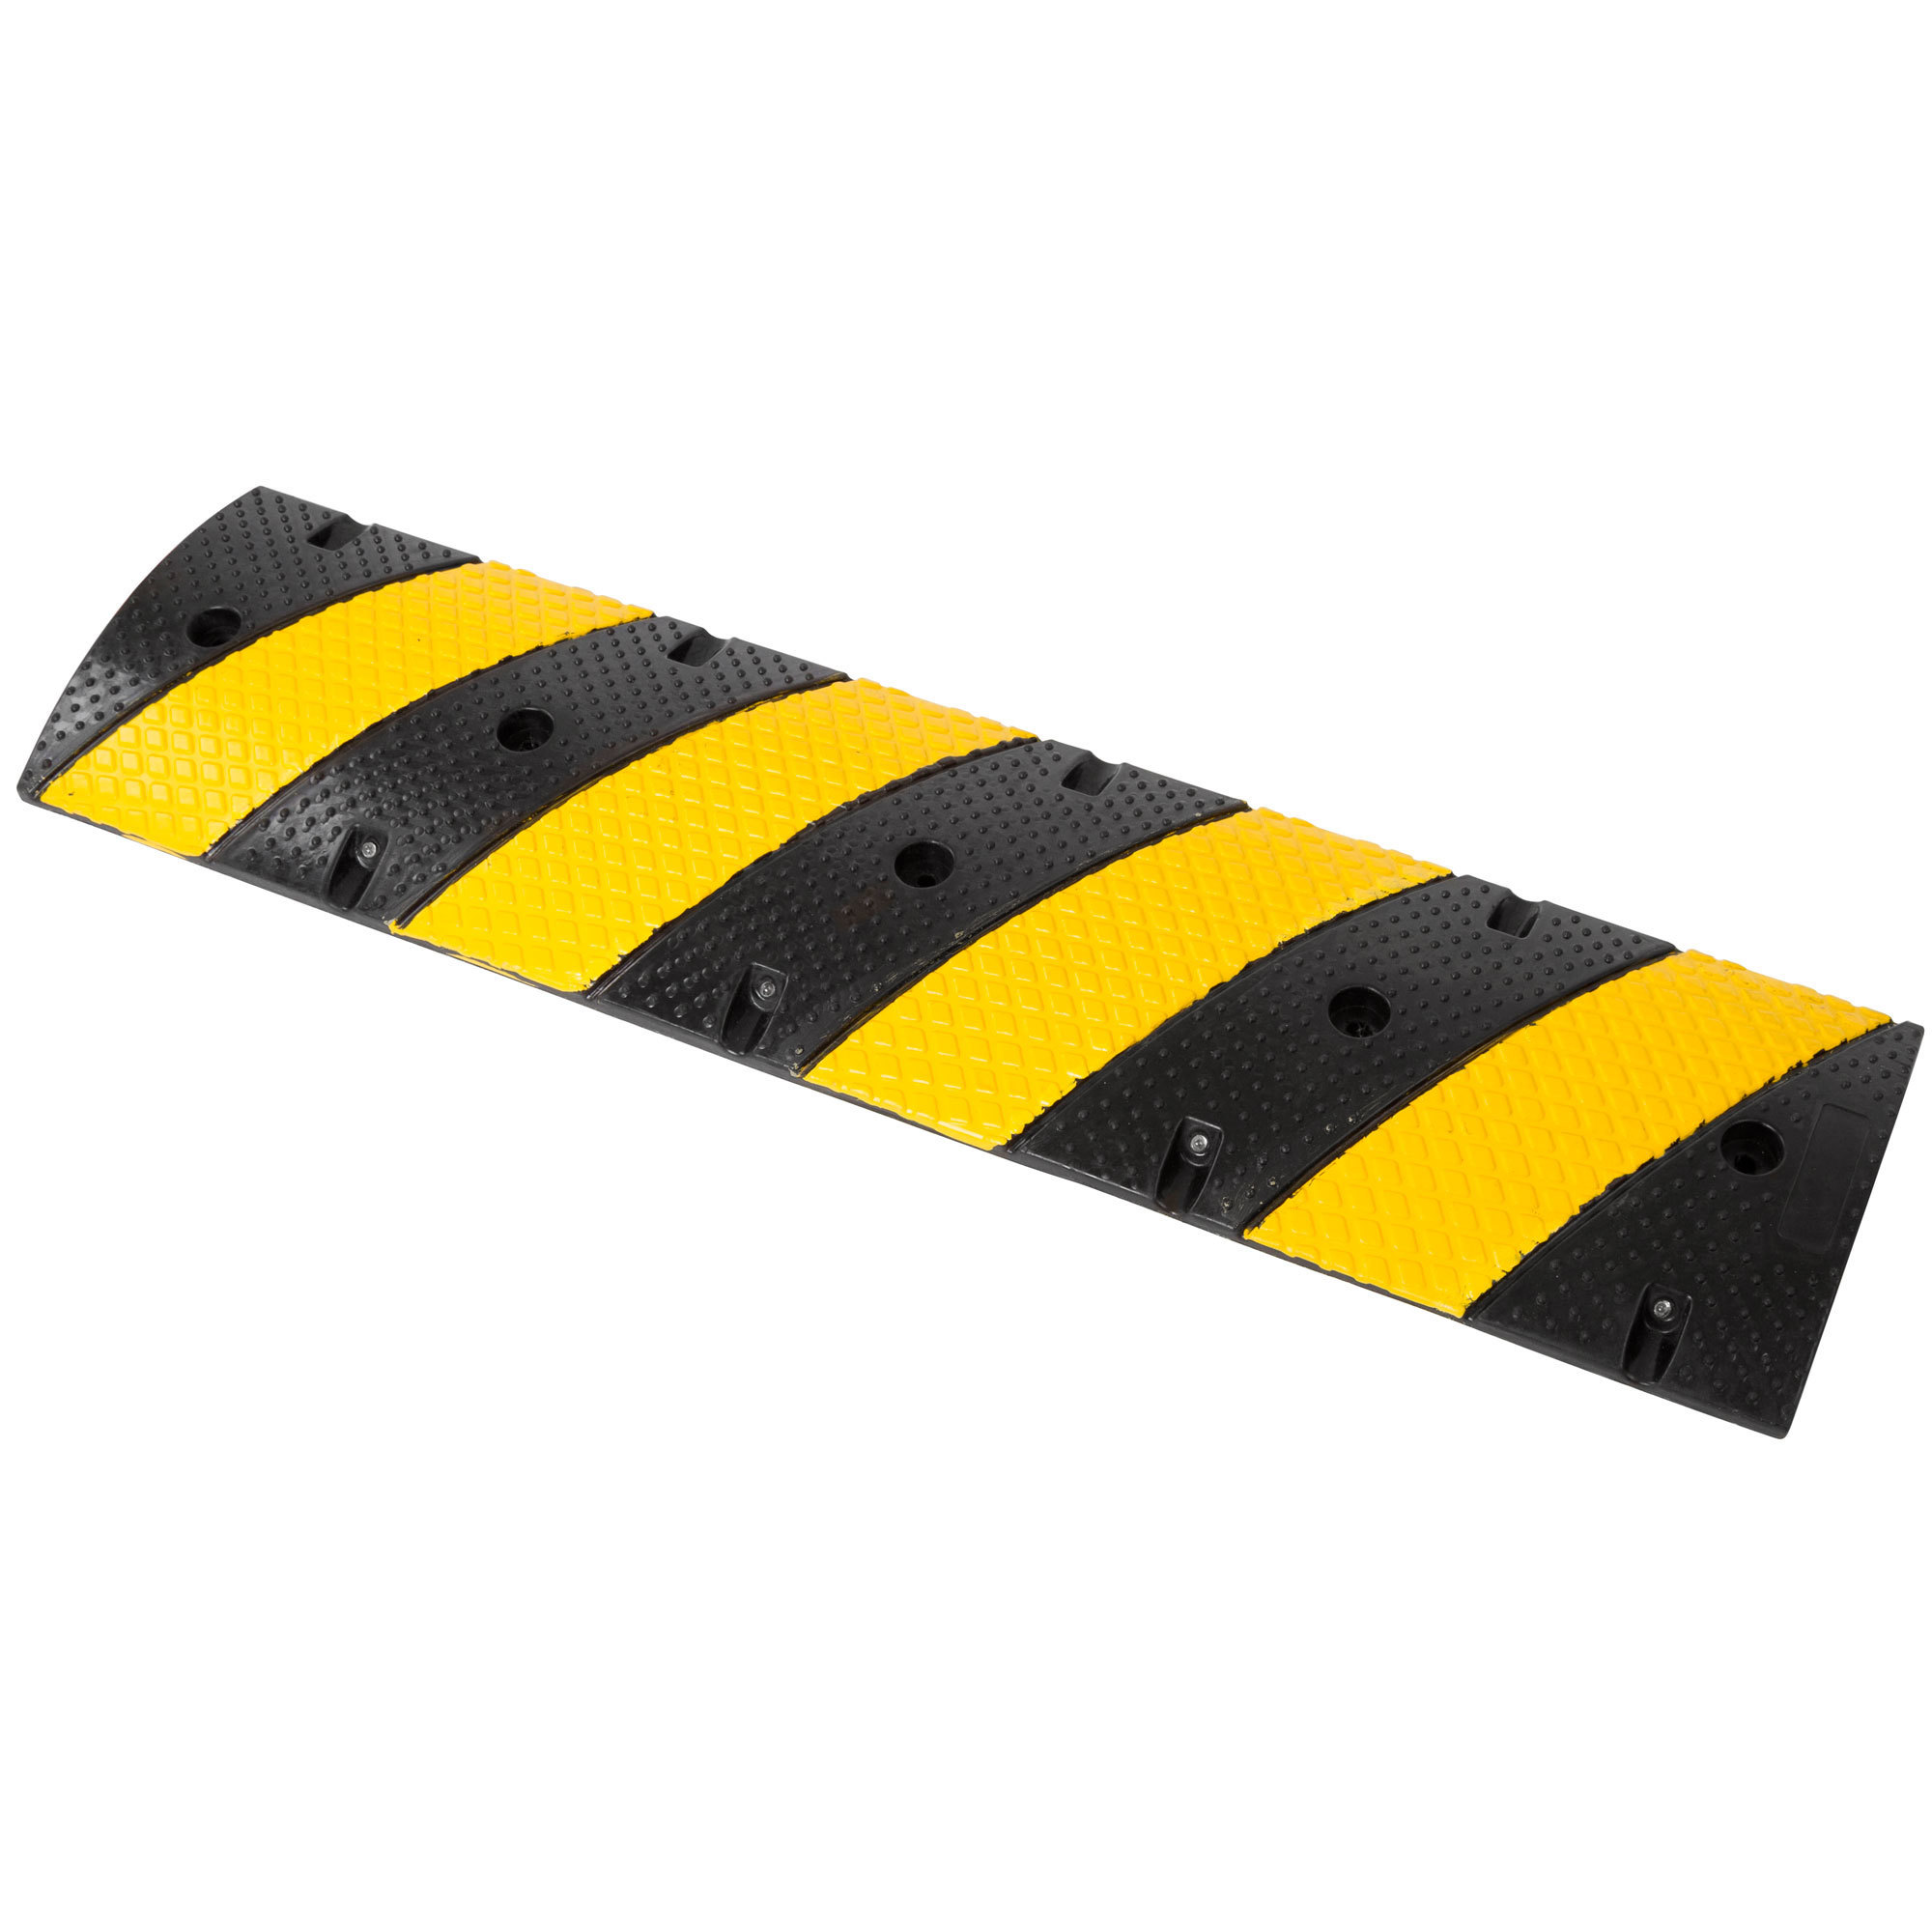 Guardian, 4ft. speed bump middle section w/yllw EPDM Molded, Length 47 in, Height 2 in, Material Rubber, Model DH-SP-29M